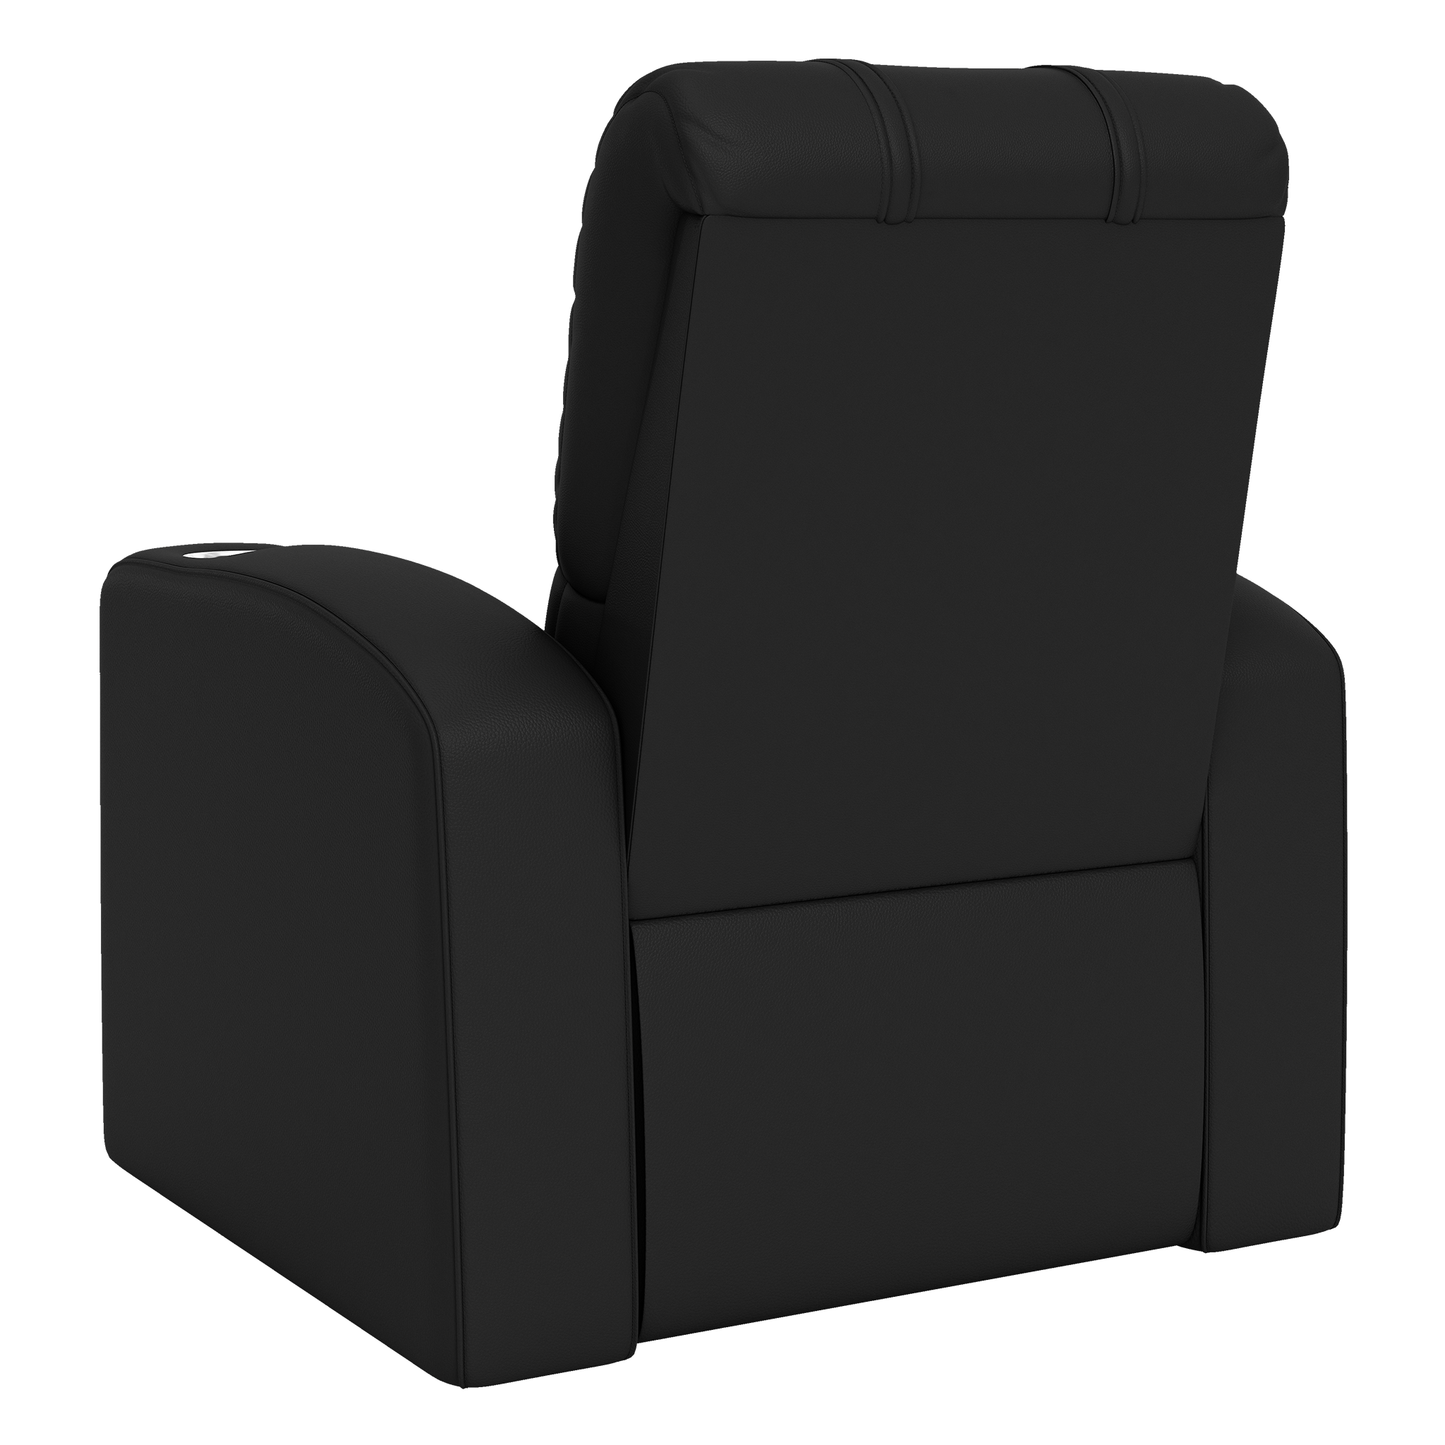 Relax Home Theater Recliner with Colorado Avalanche Logo